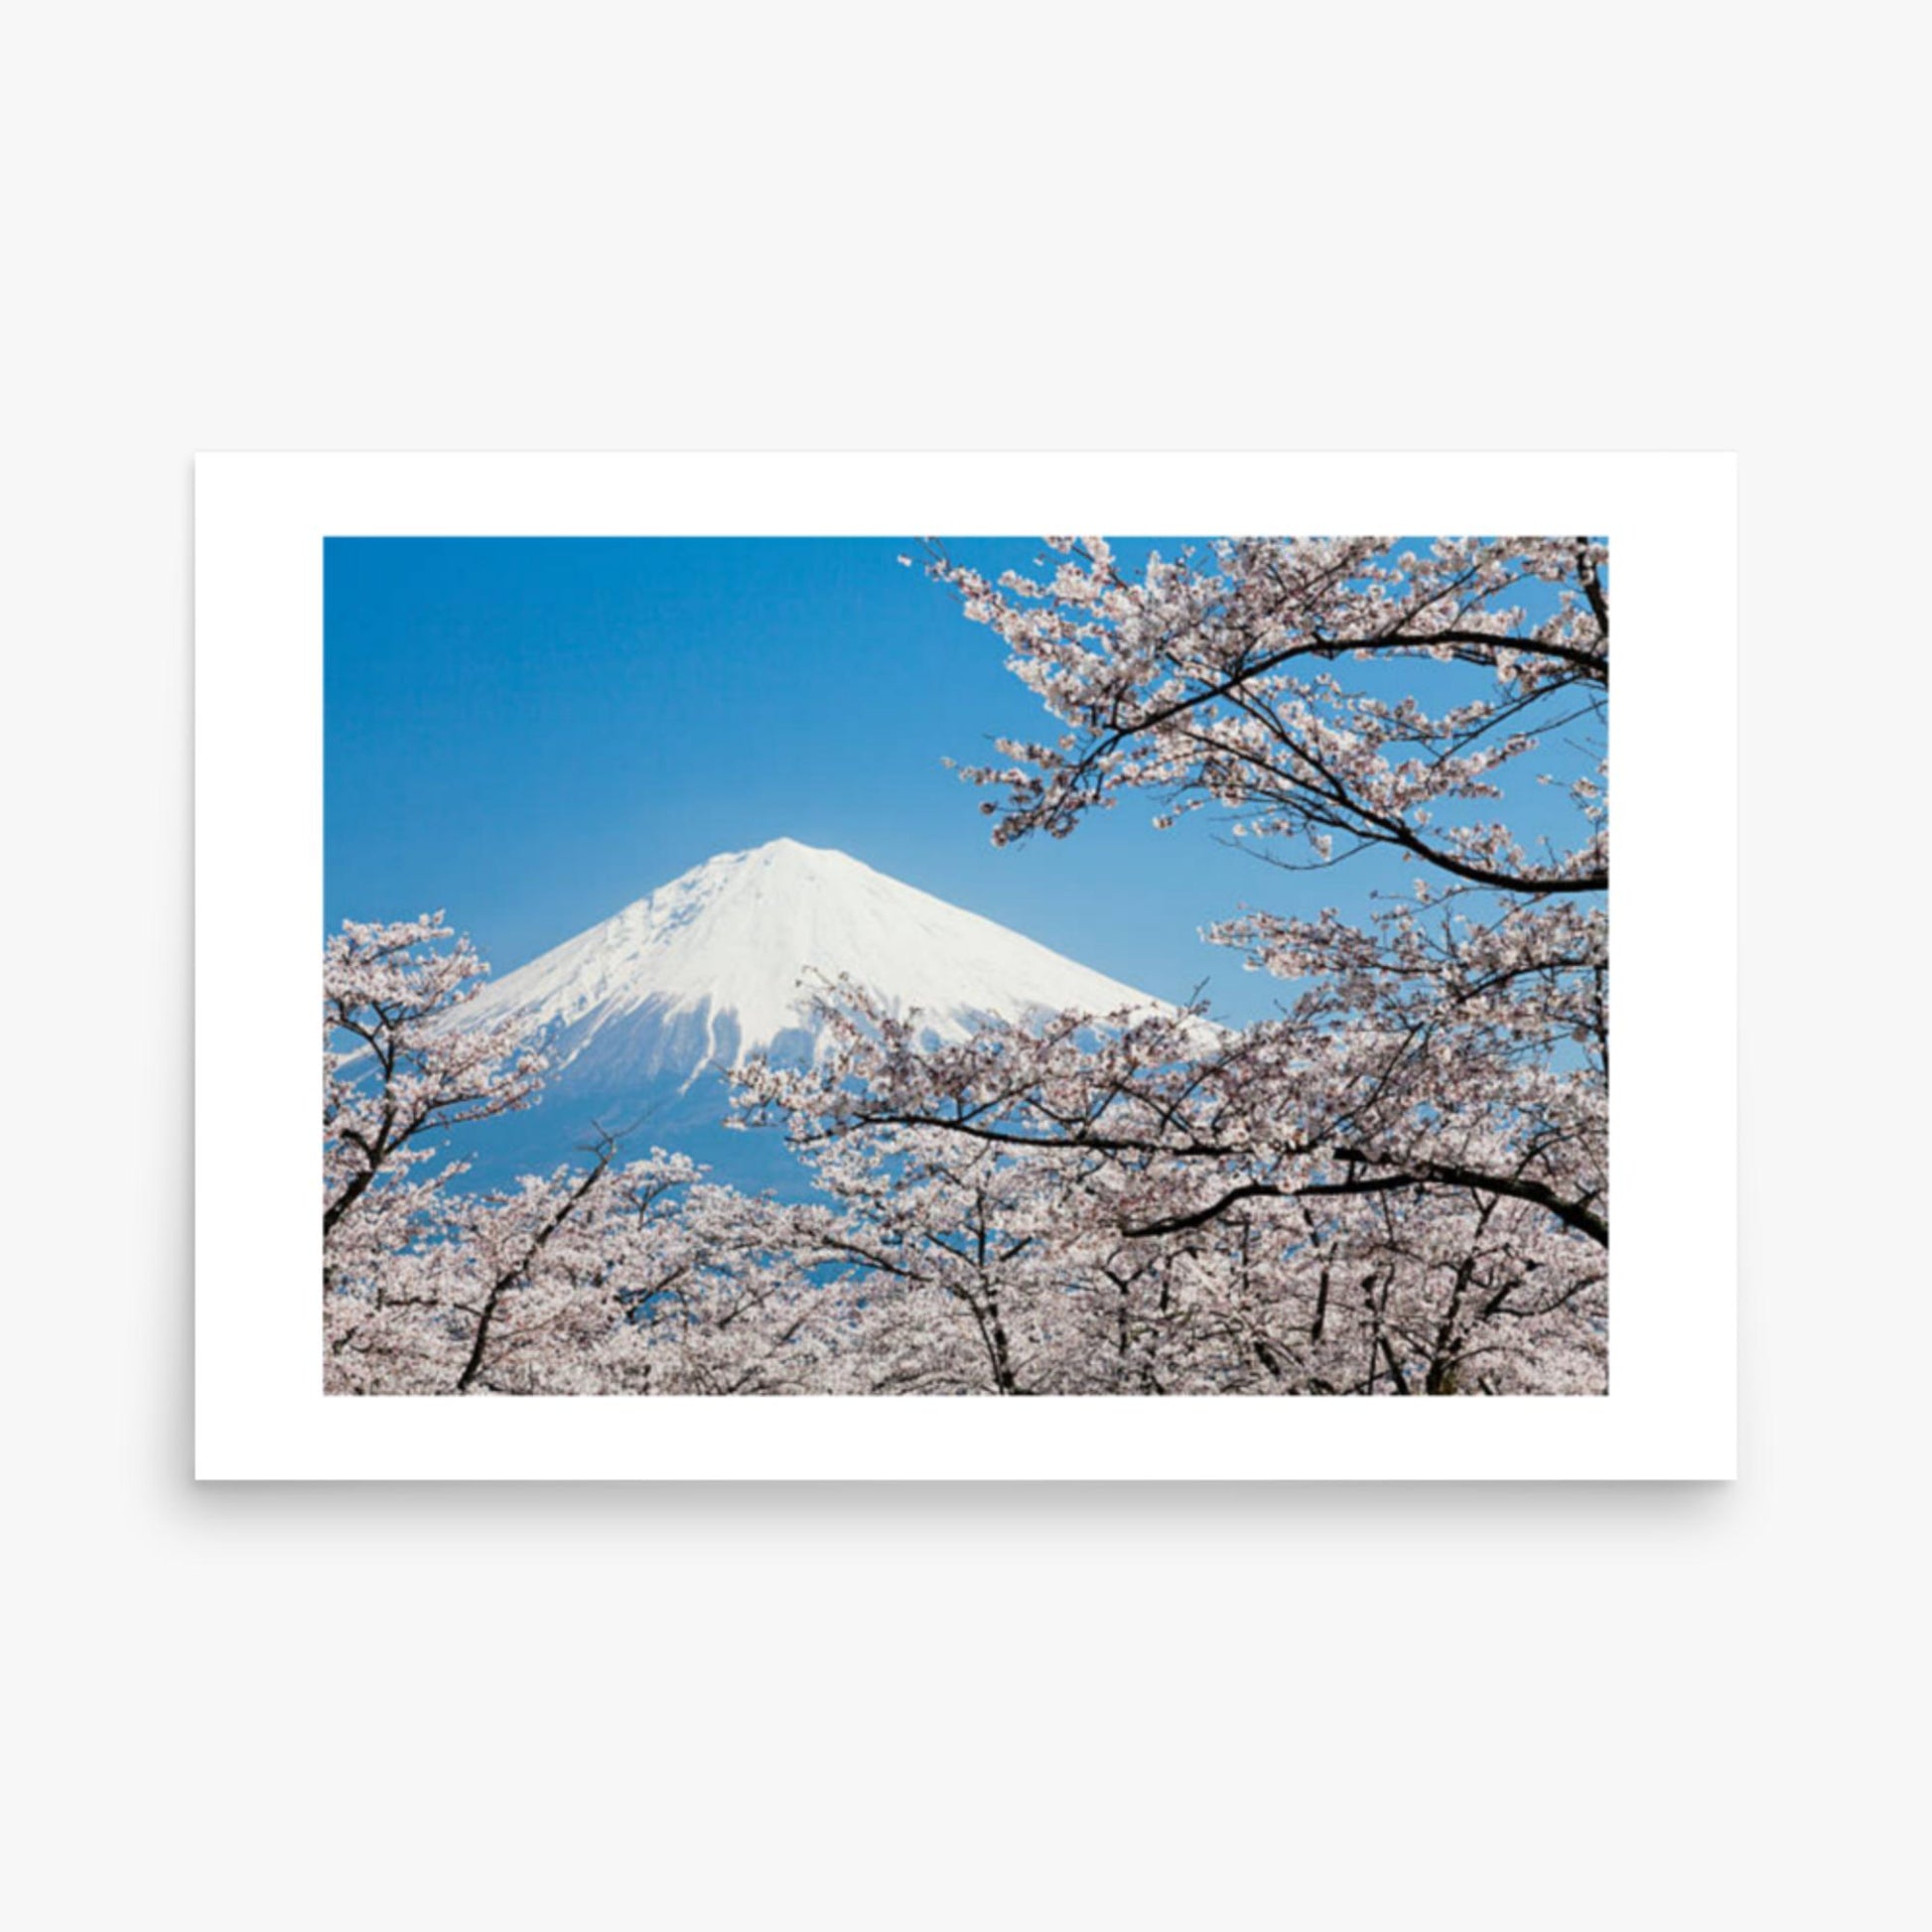 Mount Fuji & Cherry Blossoms 24x36 in Poster